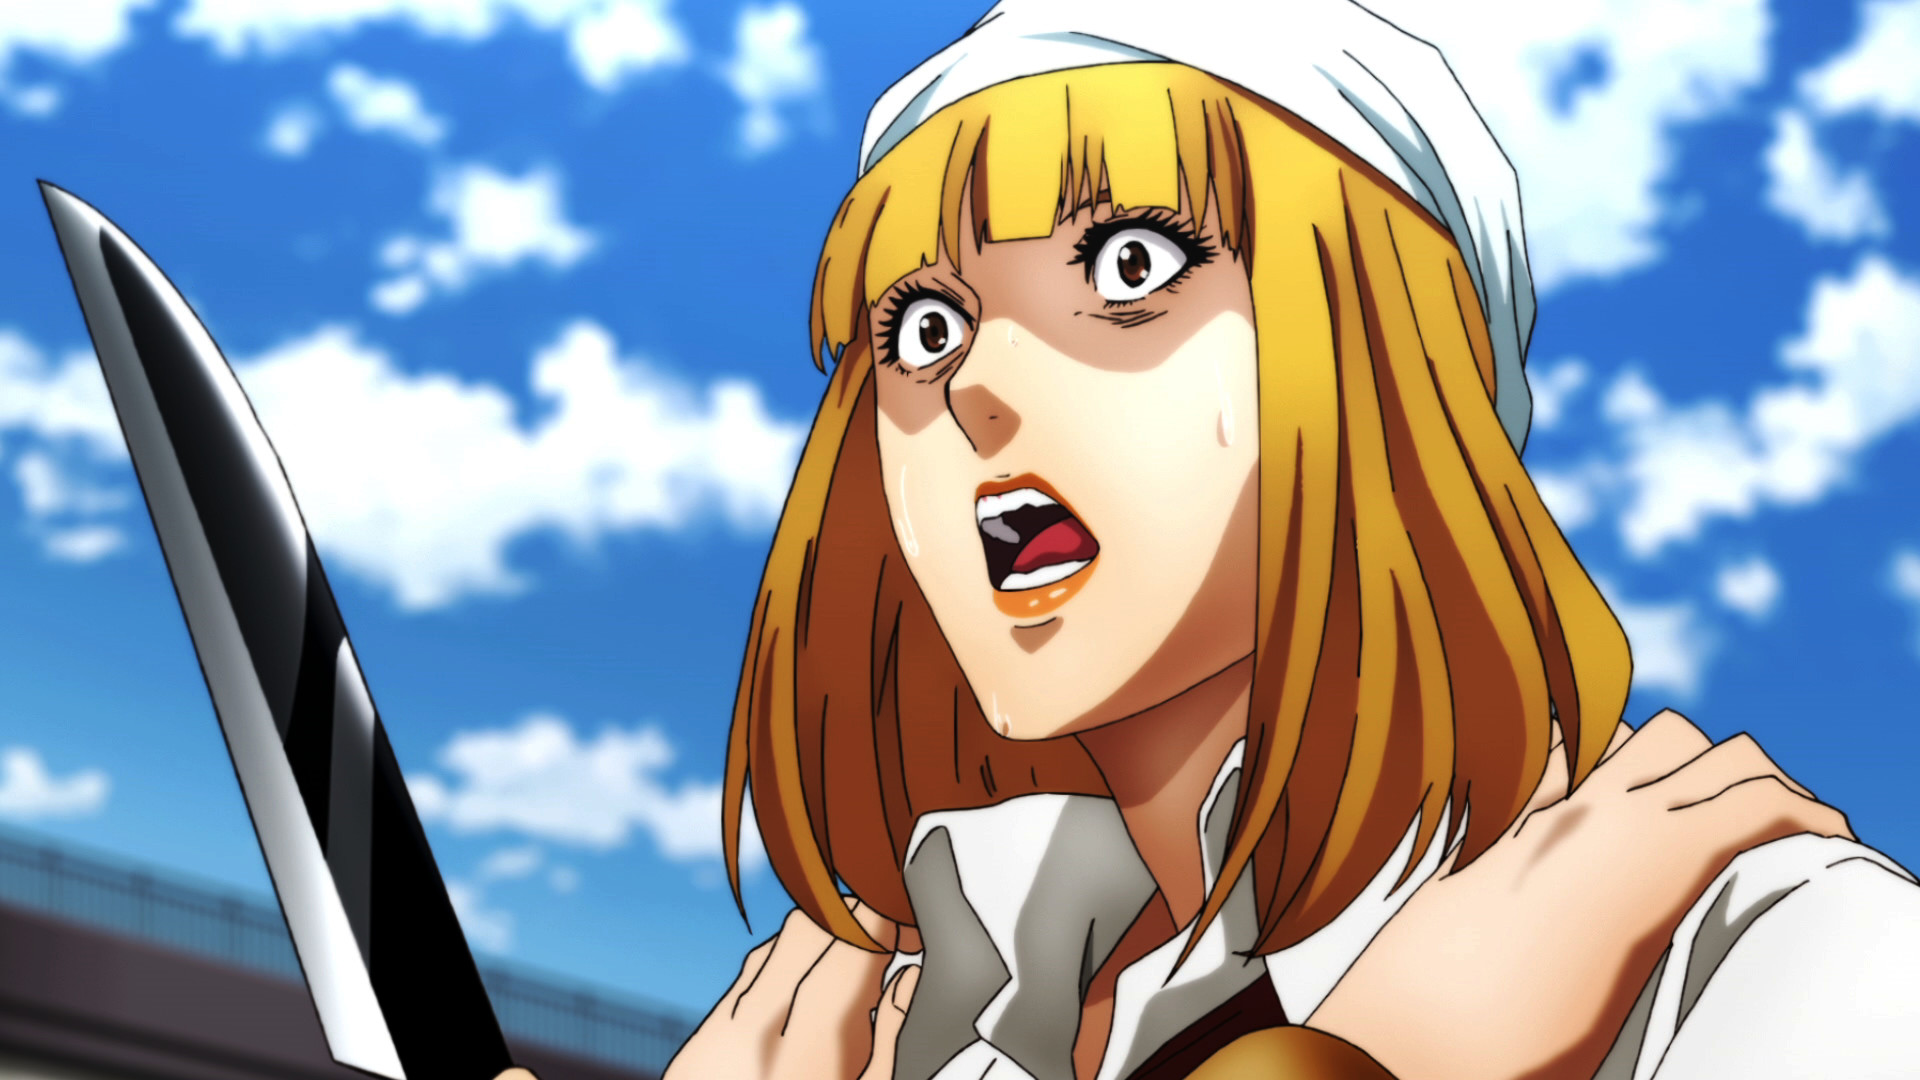 Why Hasn't Prison School Returned? Unveiling the Studio Secrets and Fan Hopes for the Anime's Long-Awaited Second Season